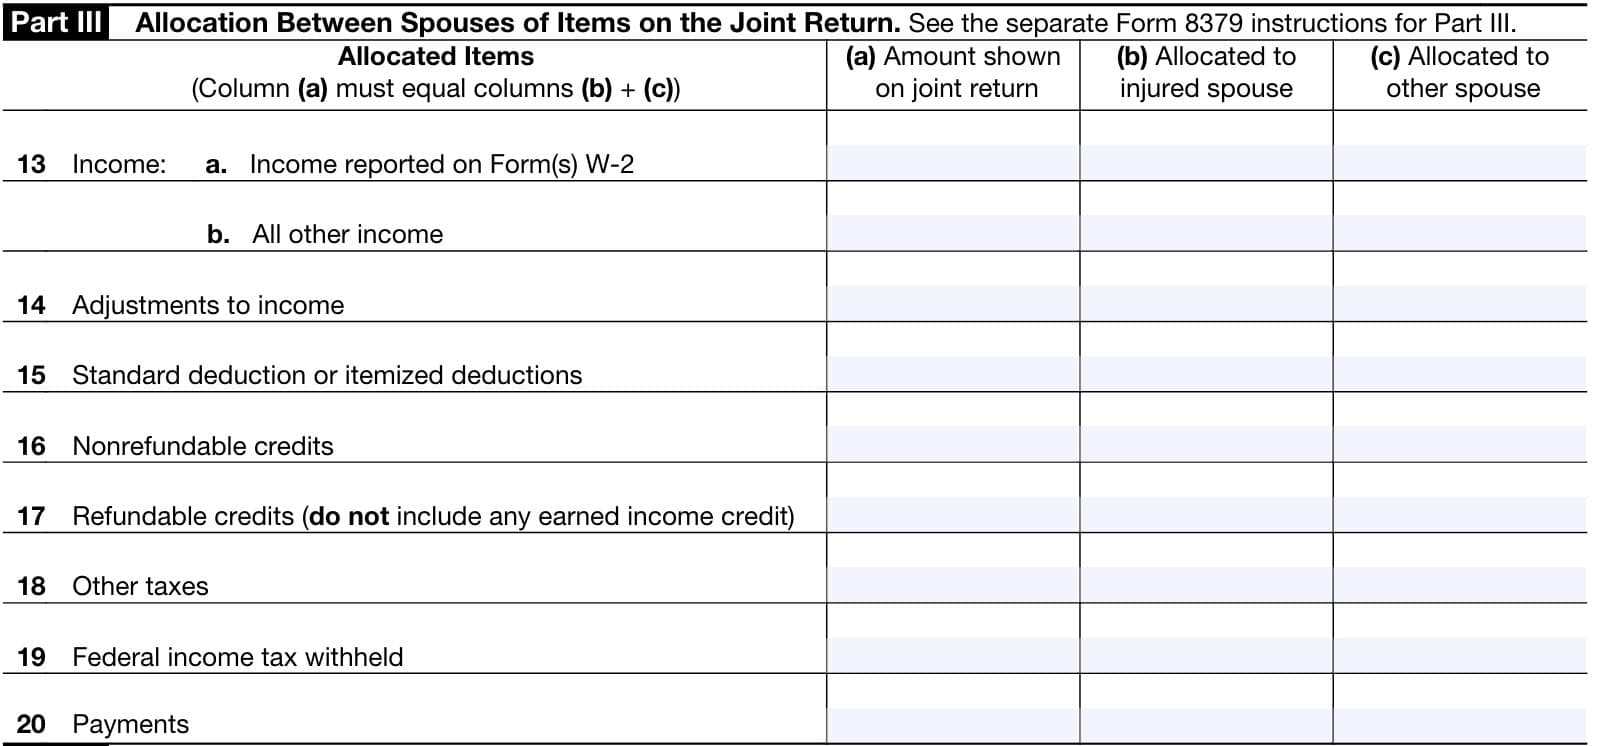 IRS Form 8379, Part III: Allocation between spouses of items on the joint return.